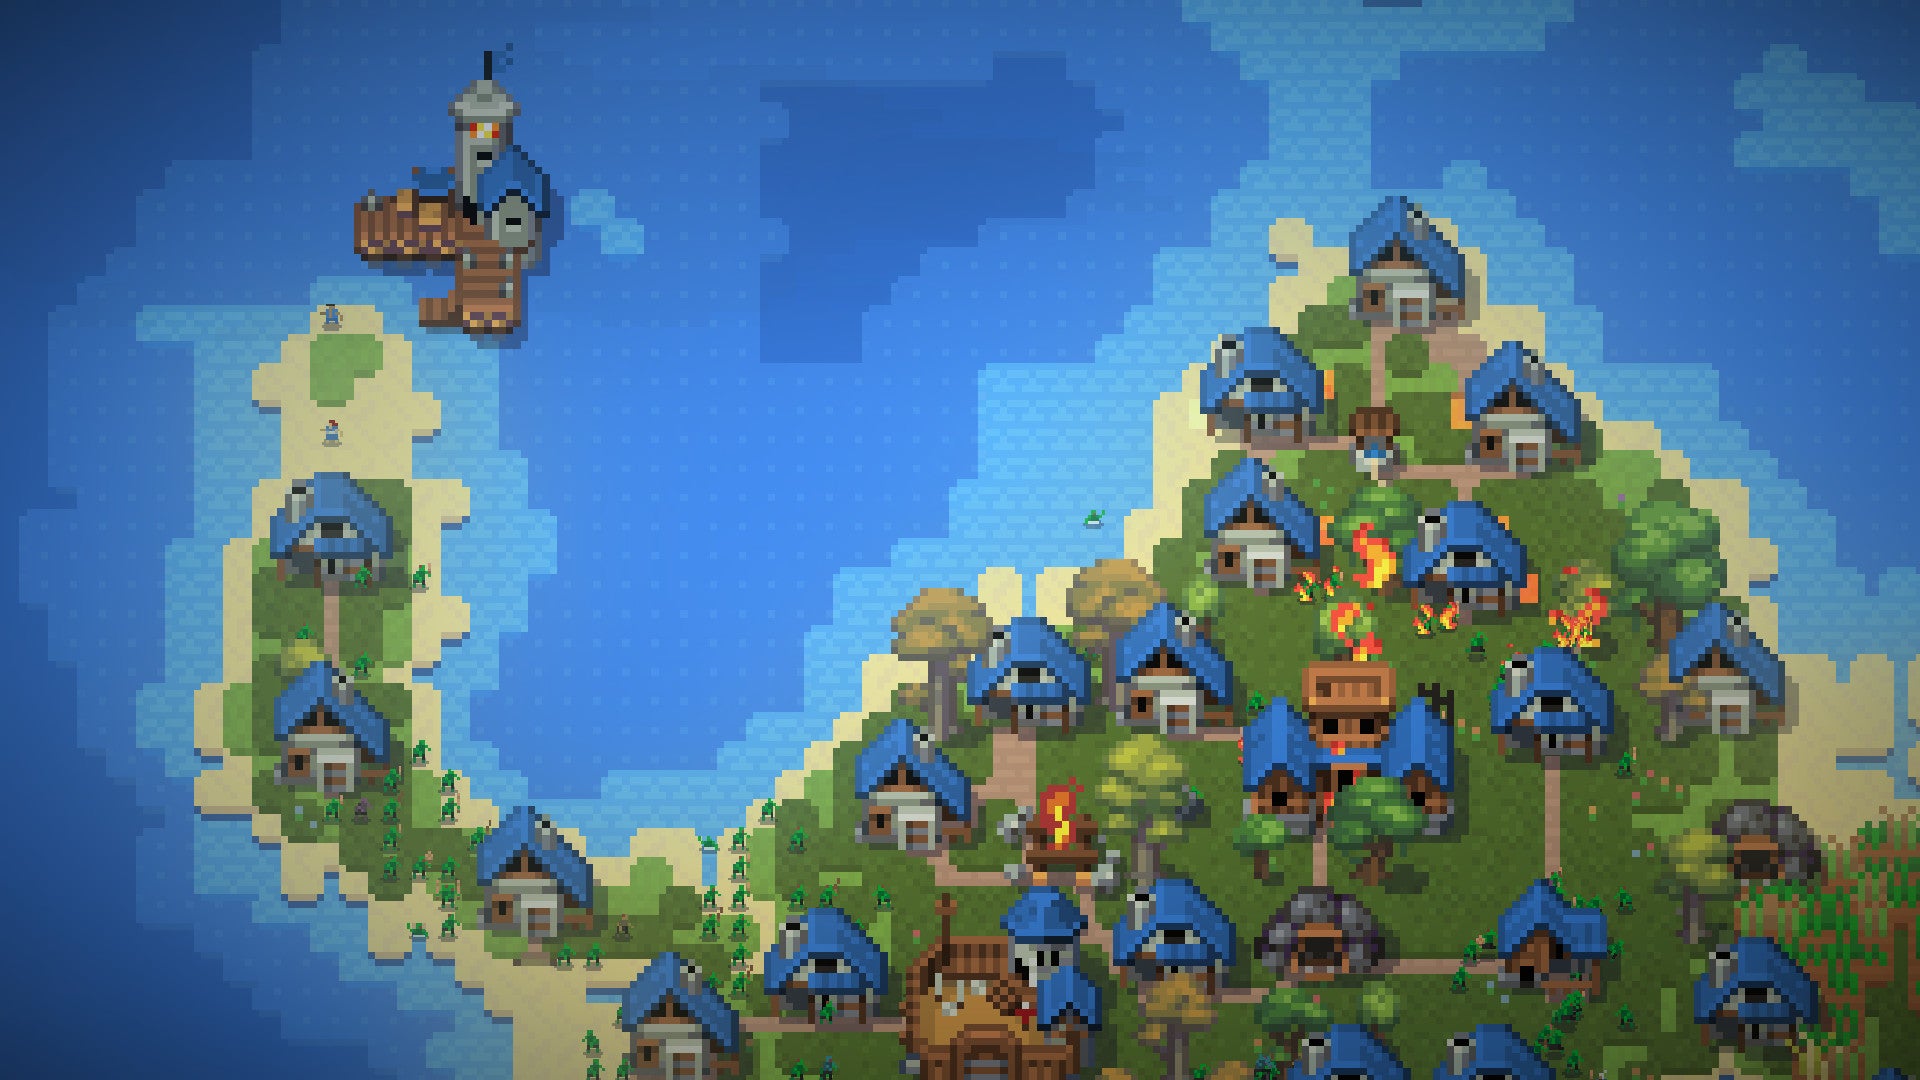 A screenshot showing a pixel village in WorldBox, with lots of blue-roofed houses surrounded by green grass, trees, and uh oh zombies.